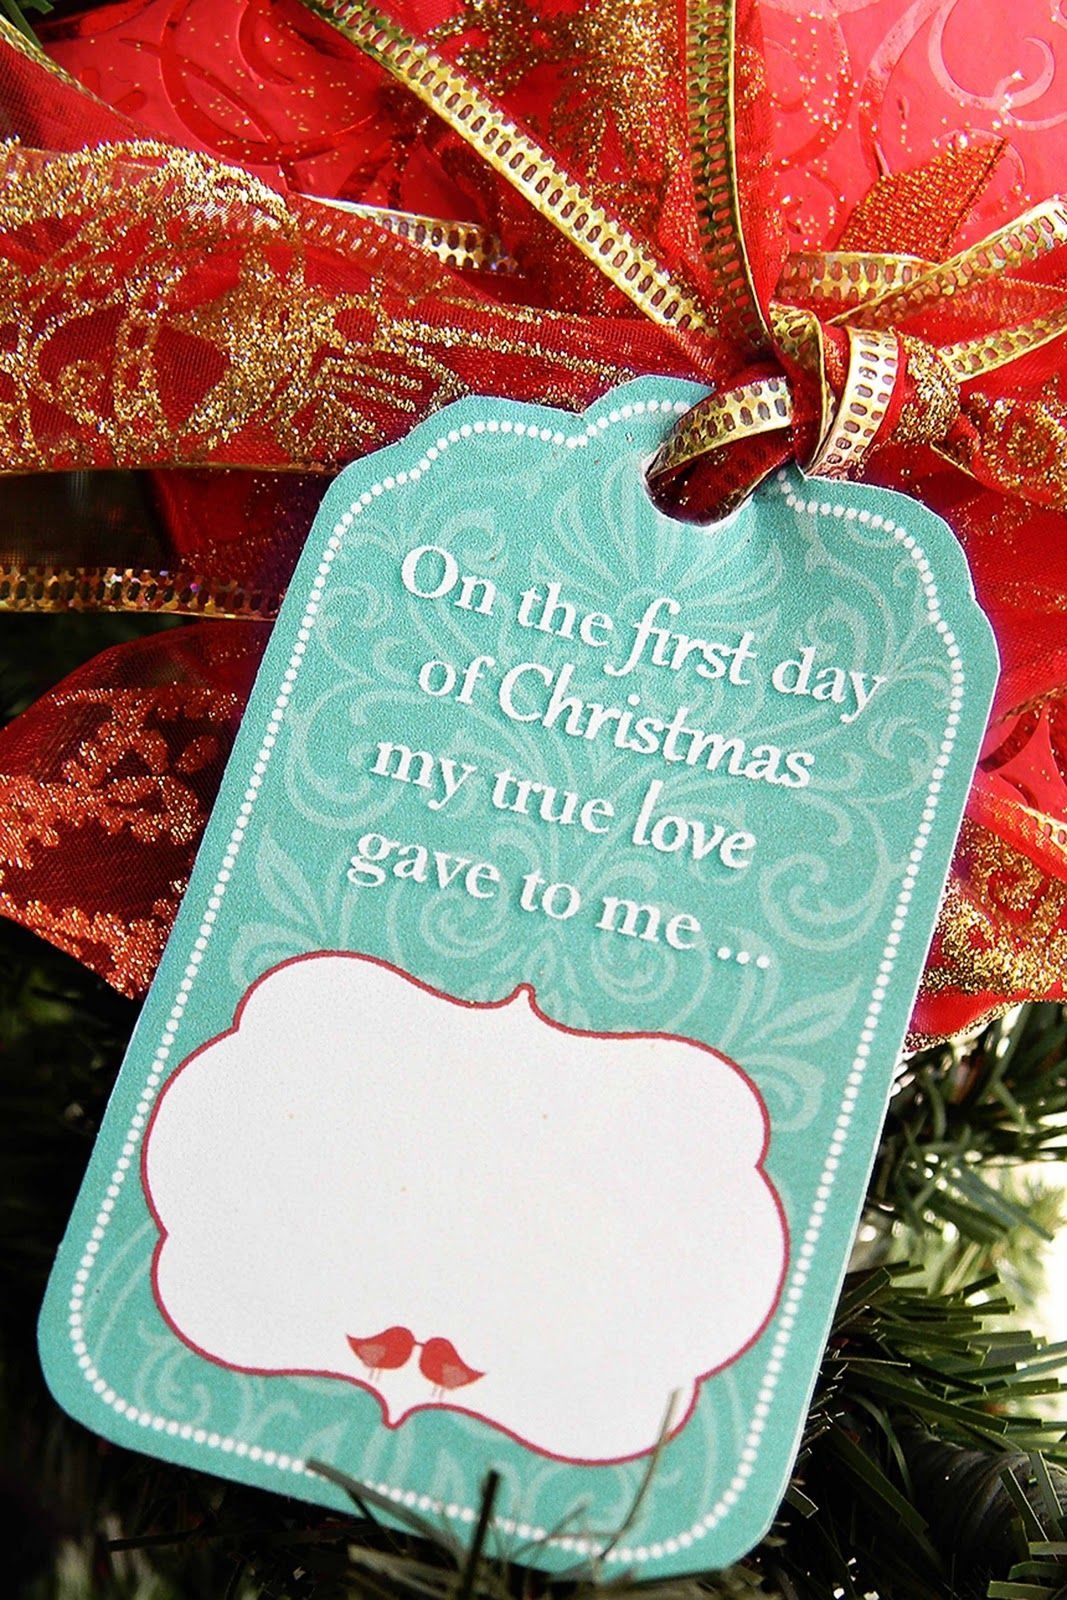 12 Days Of Christmas For Husband With Free Printable Gift Tags. Did - Free Printable 12 Days Of Christmas Gift Tags